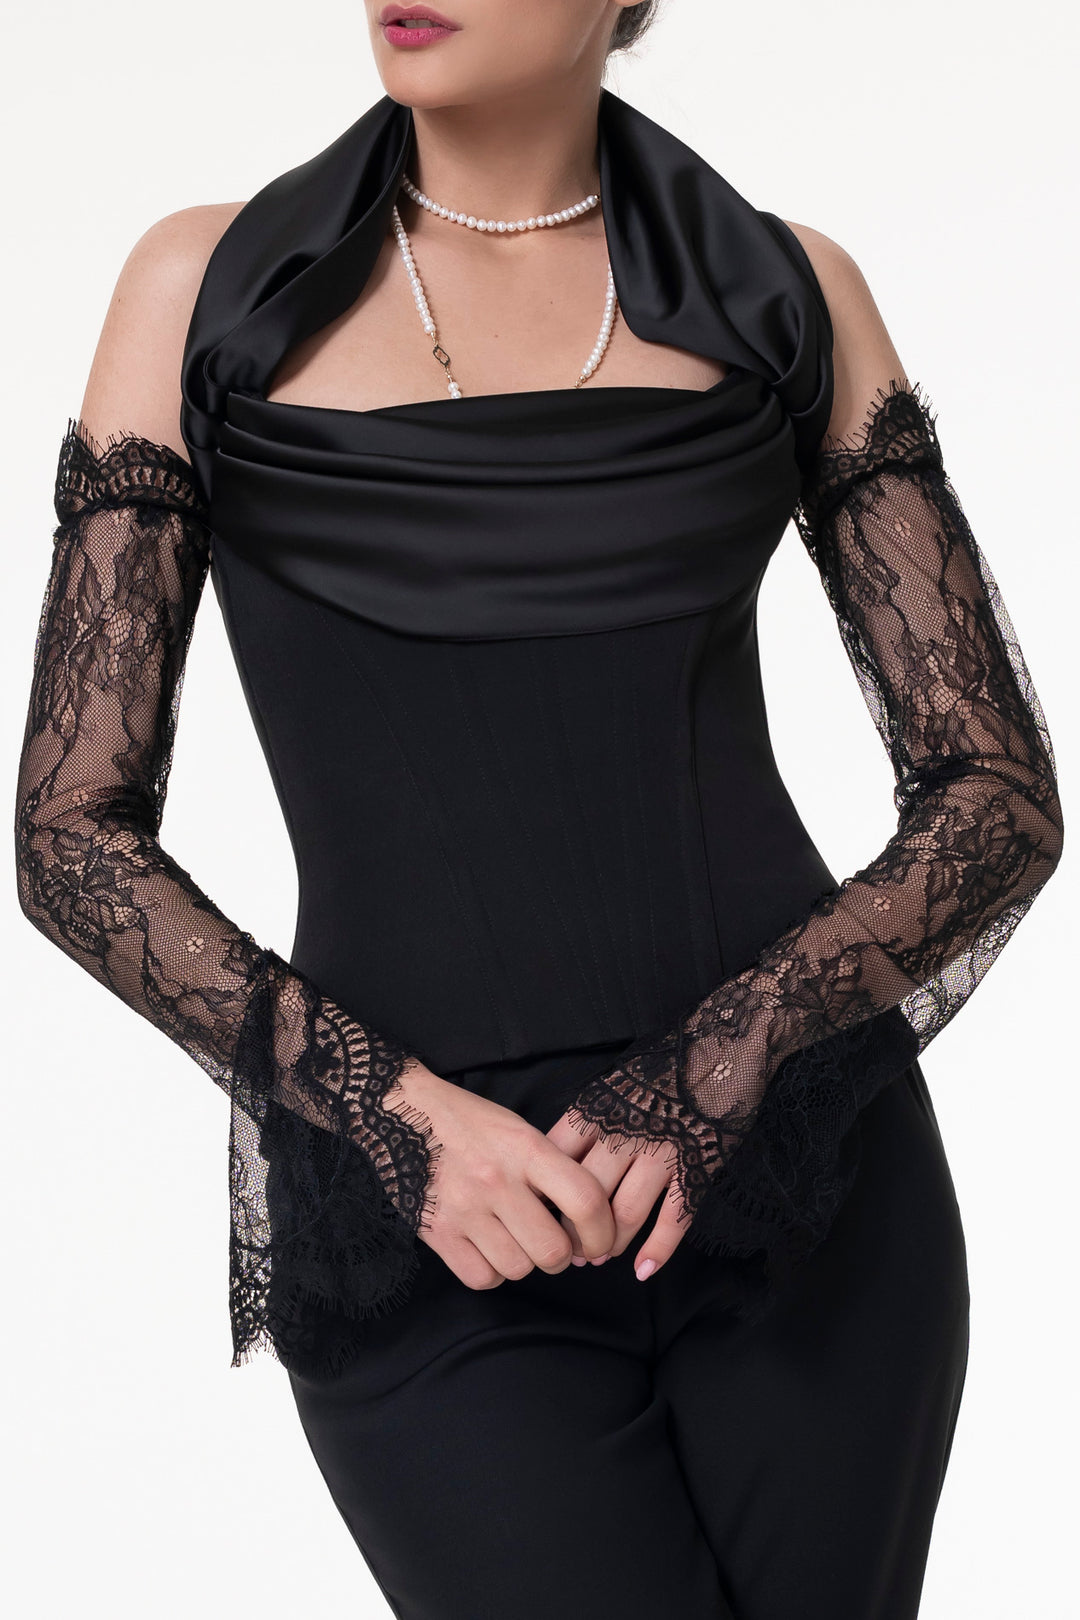 Embroidered Black Long Lace Gloves